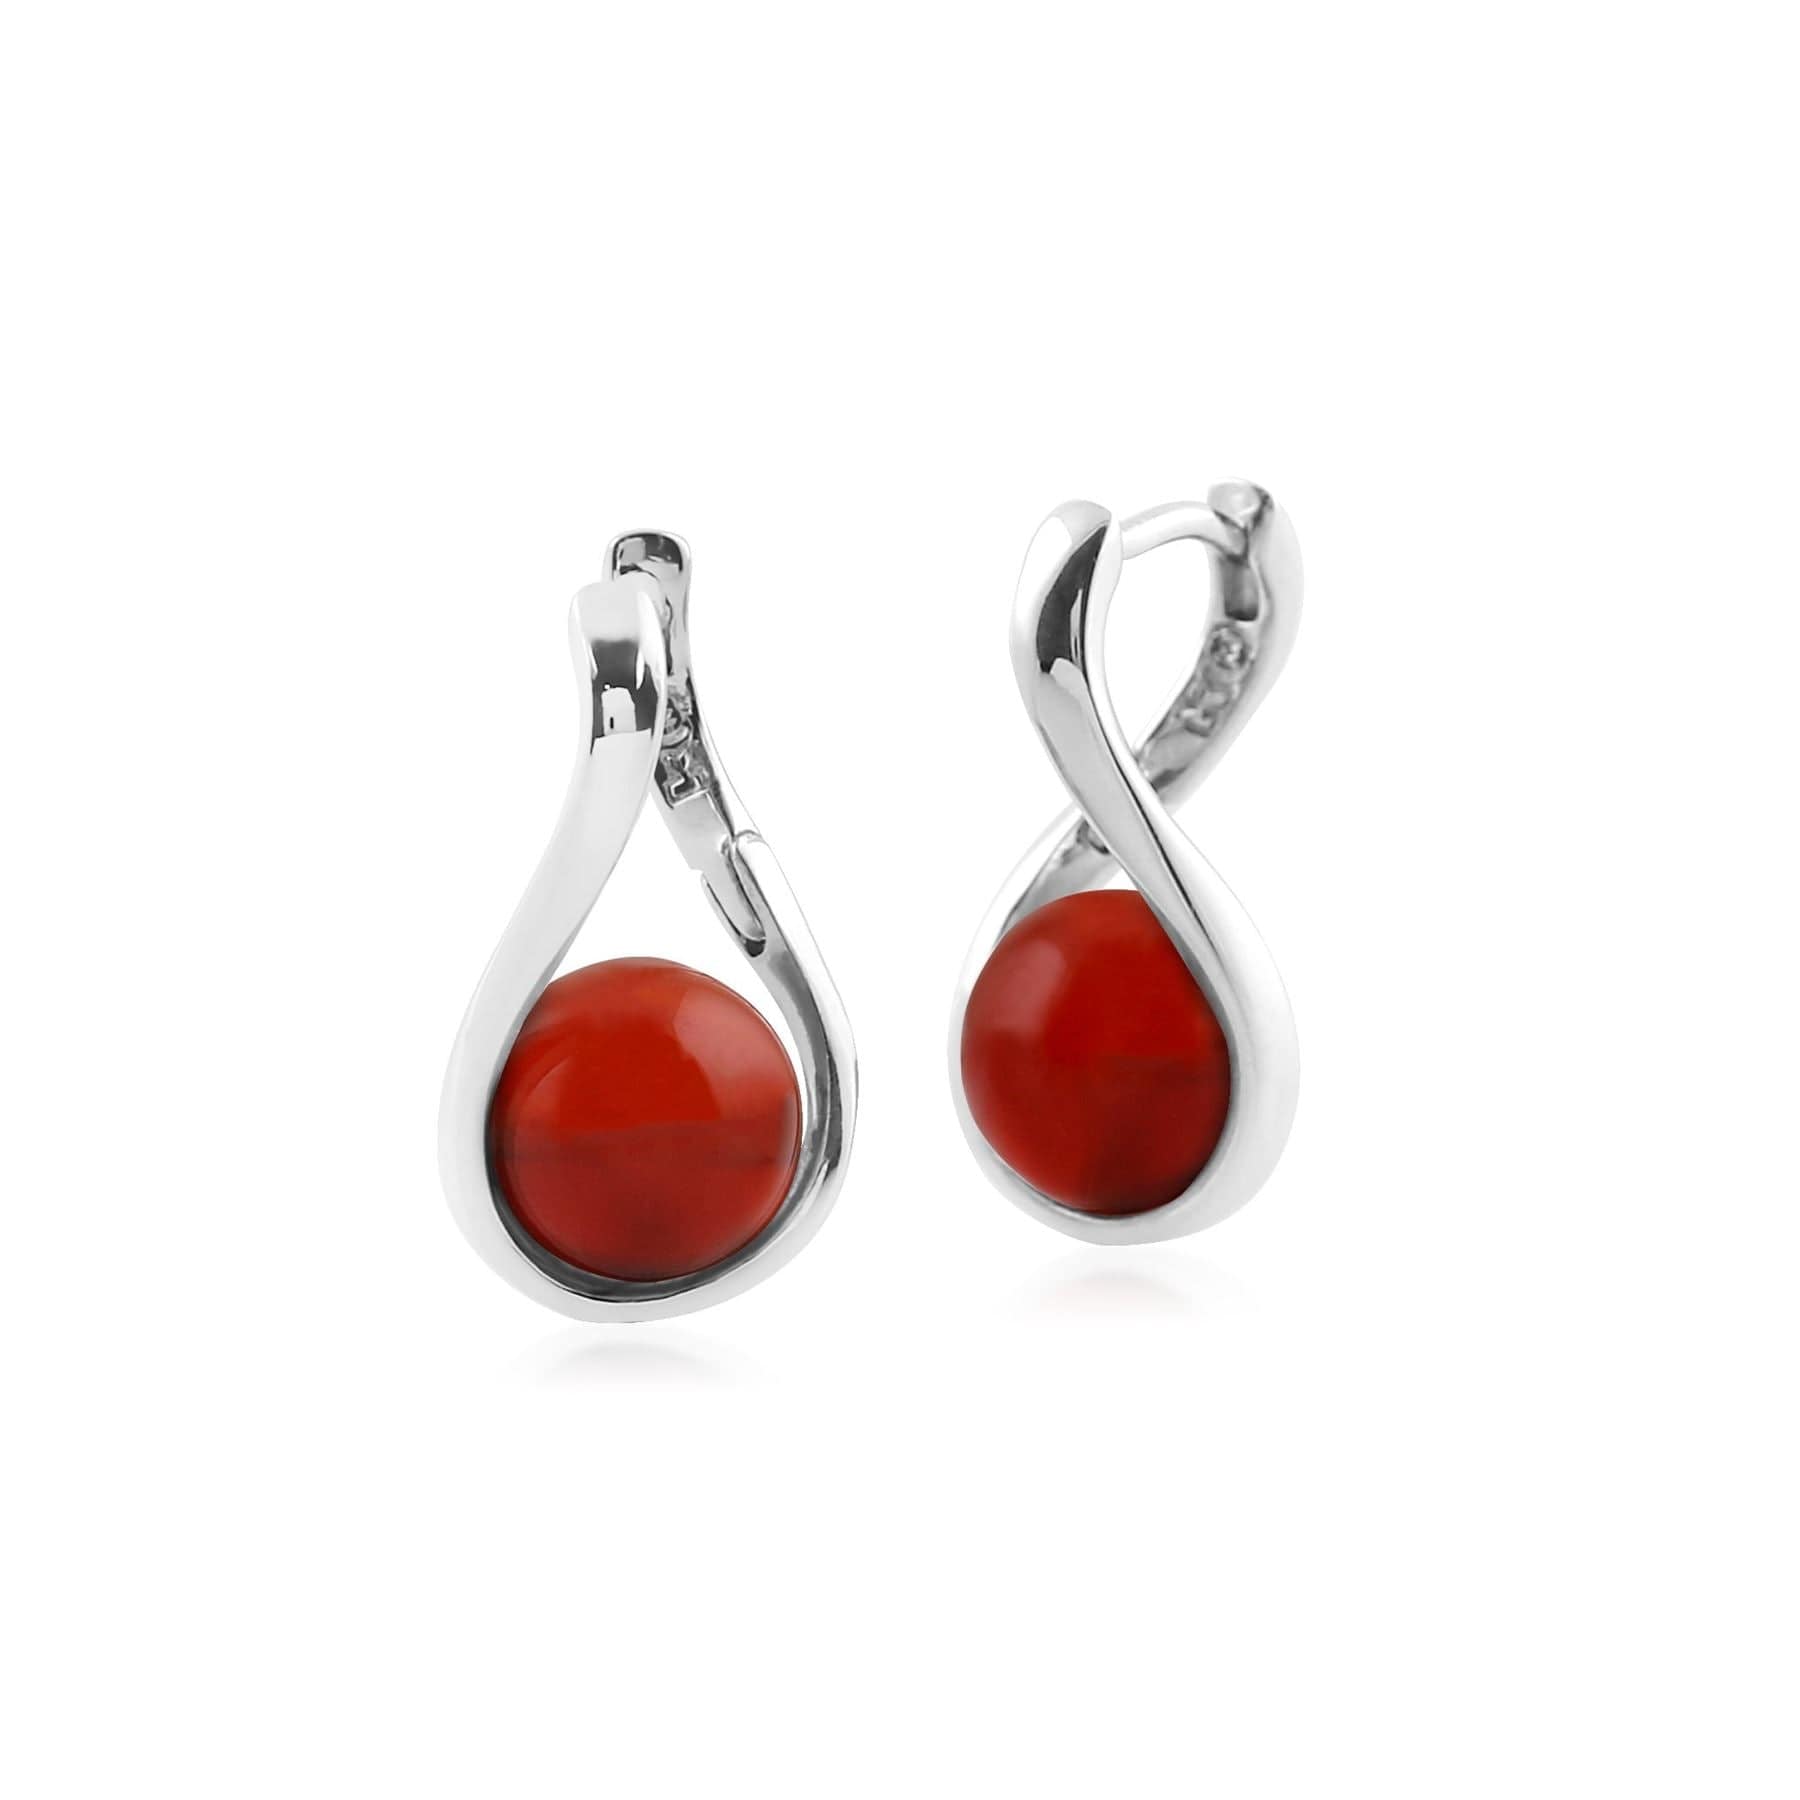 T1071E90A6 Kosmos Dyed Red Carnelian Orb Earrings in Rhodium Plated Sterling Silver 1